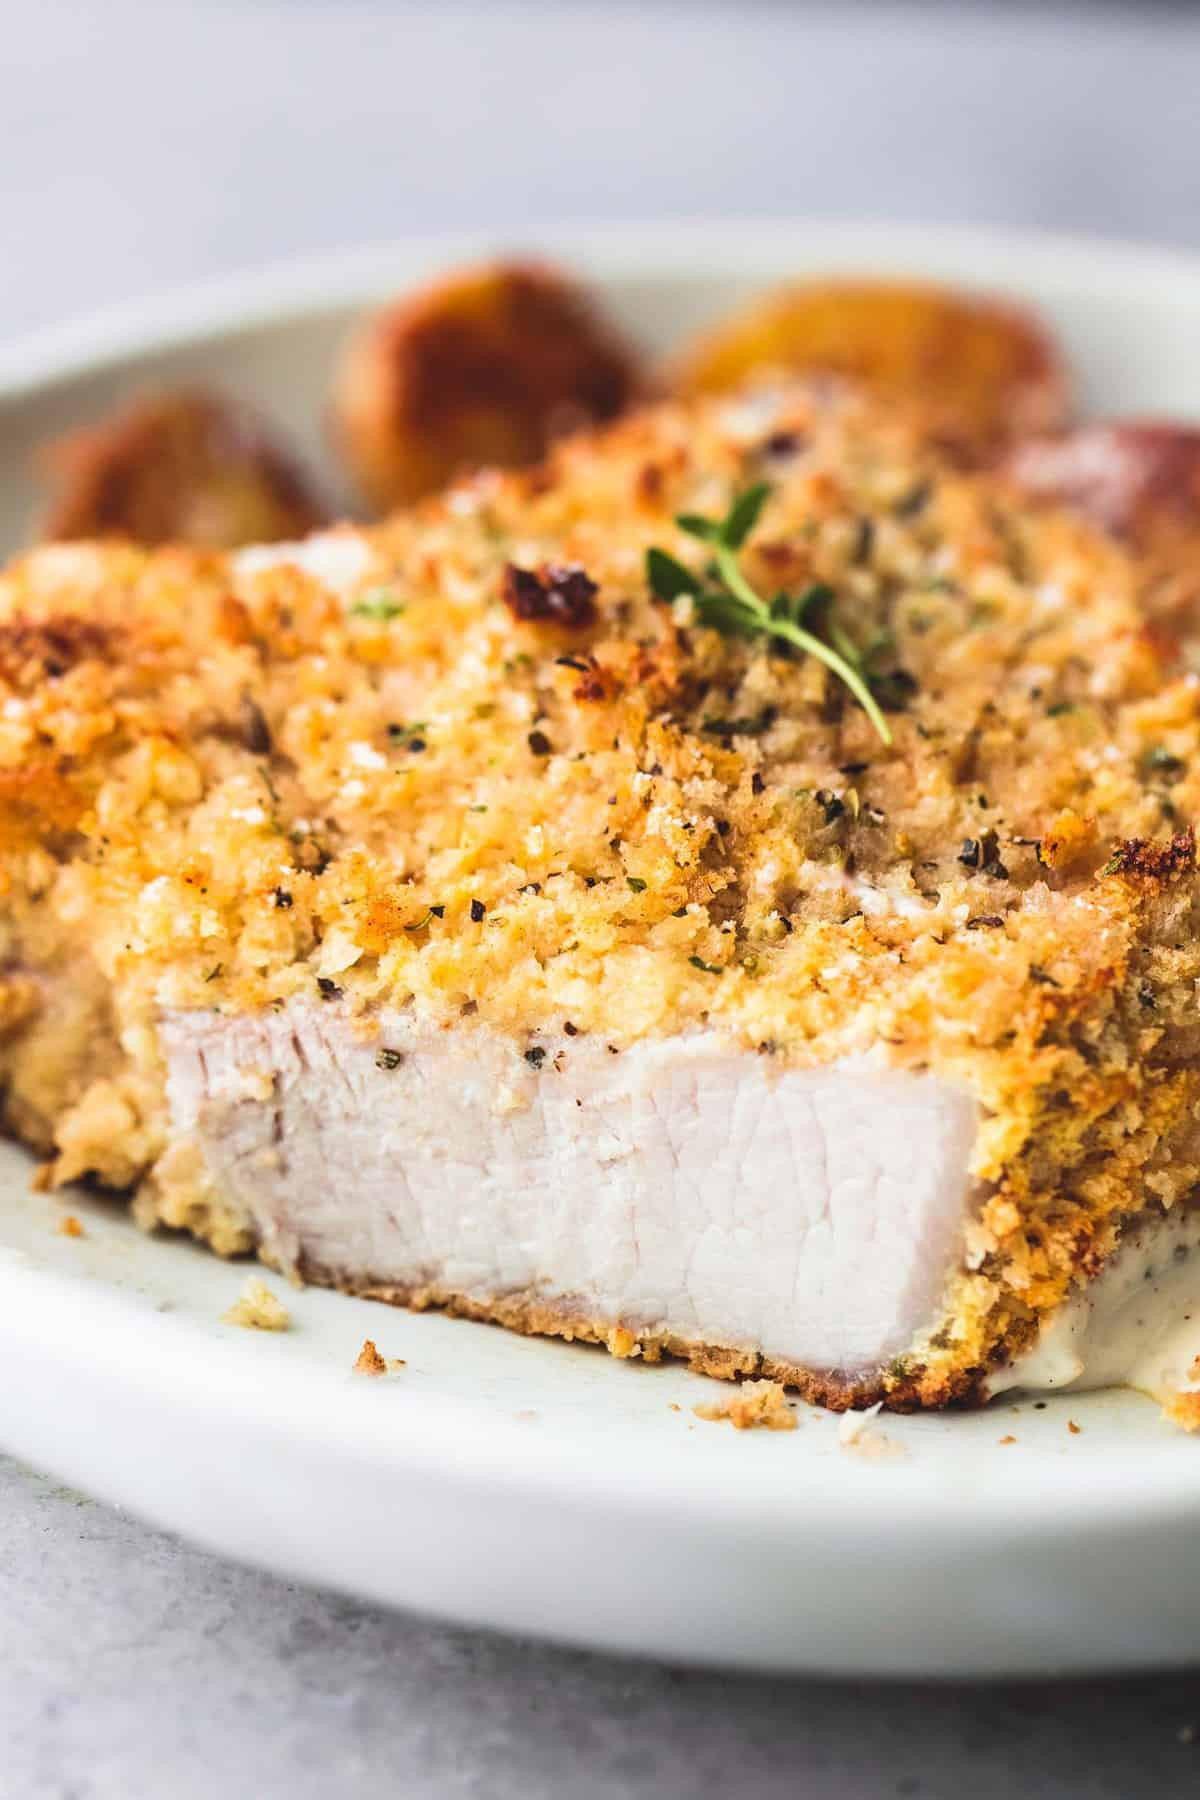 Best Recipes for Shake and Bake Pork Chops